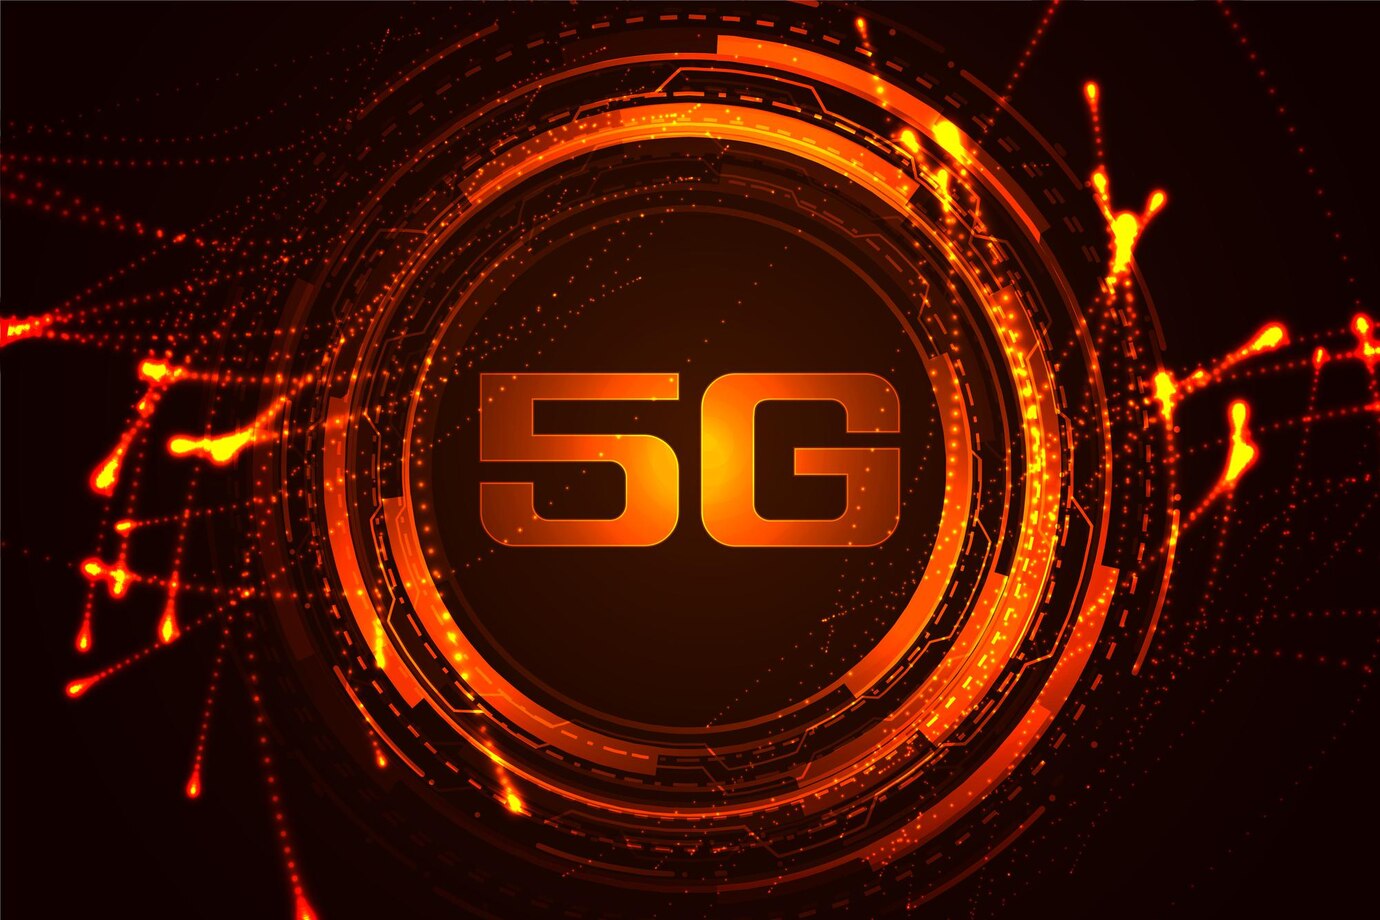 What is 5G Technology in Simple Terms